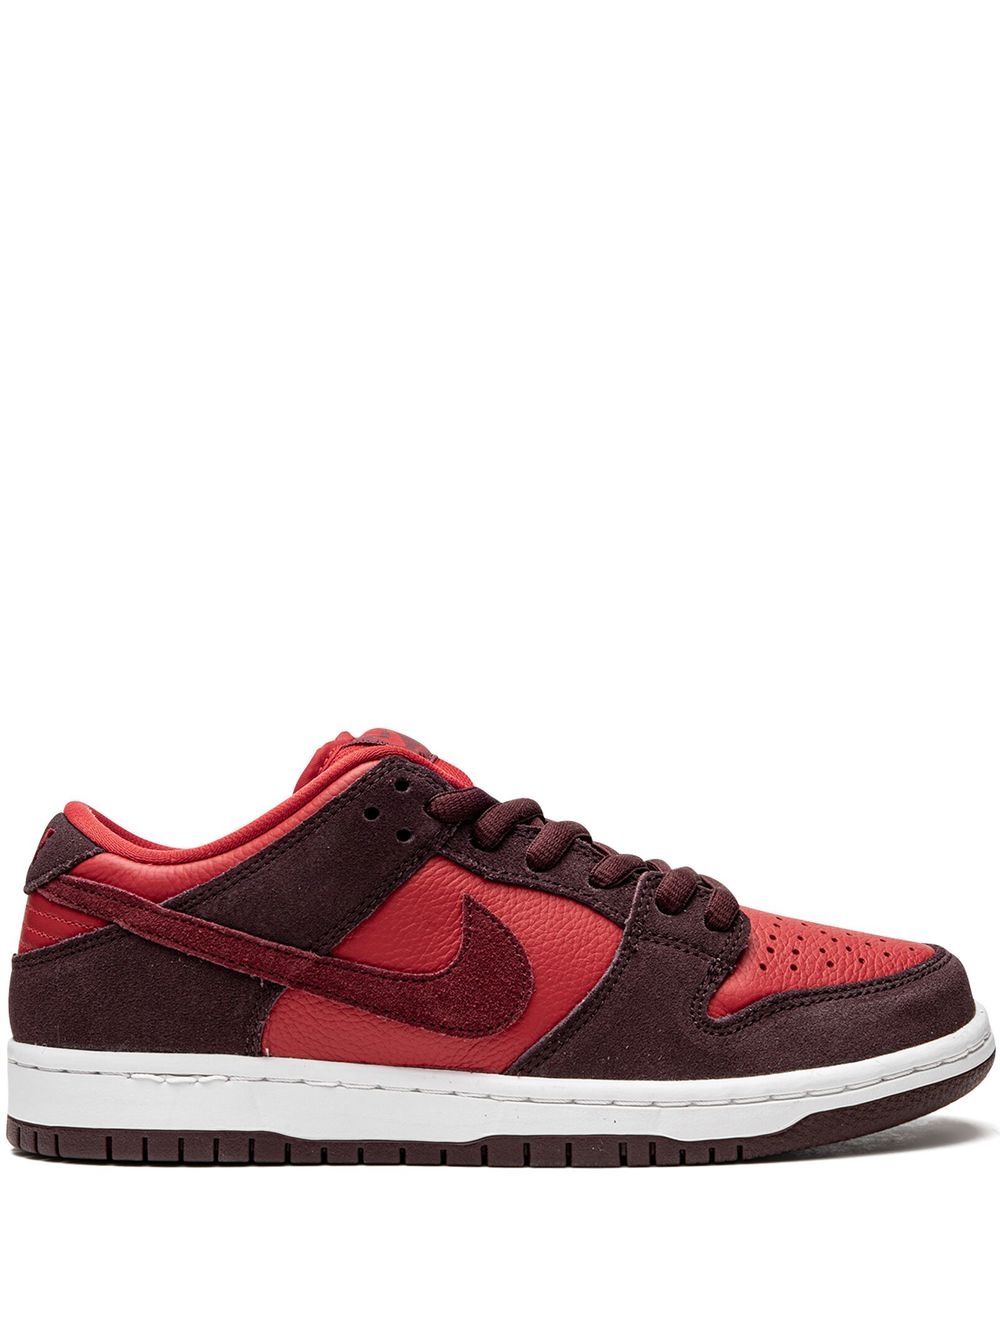 Nike SB Dunk Low "Cherry" sneakers - Red von Nike